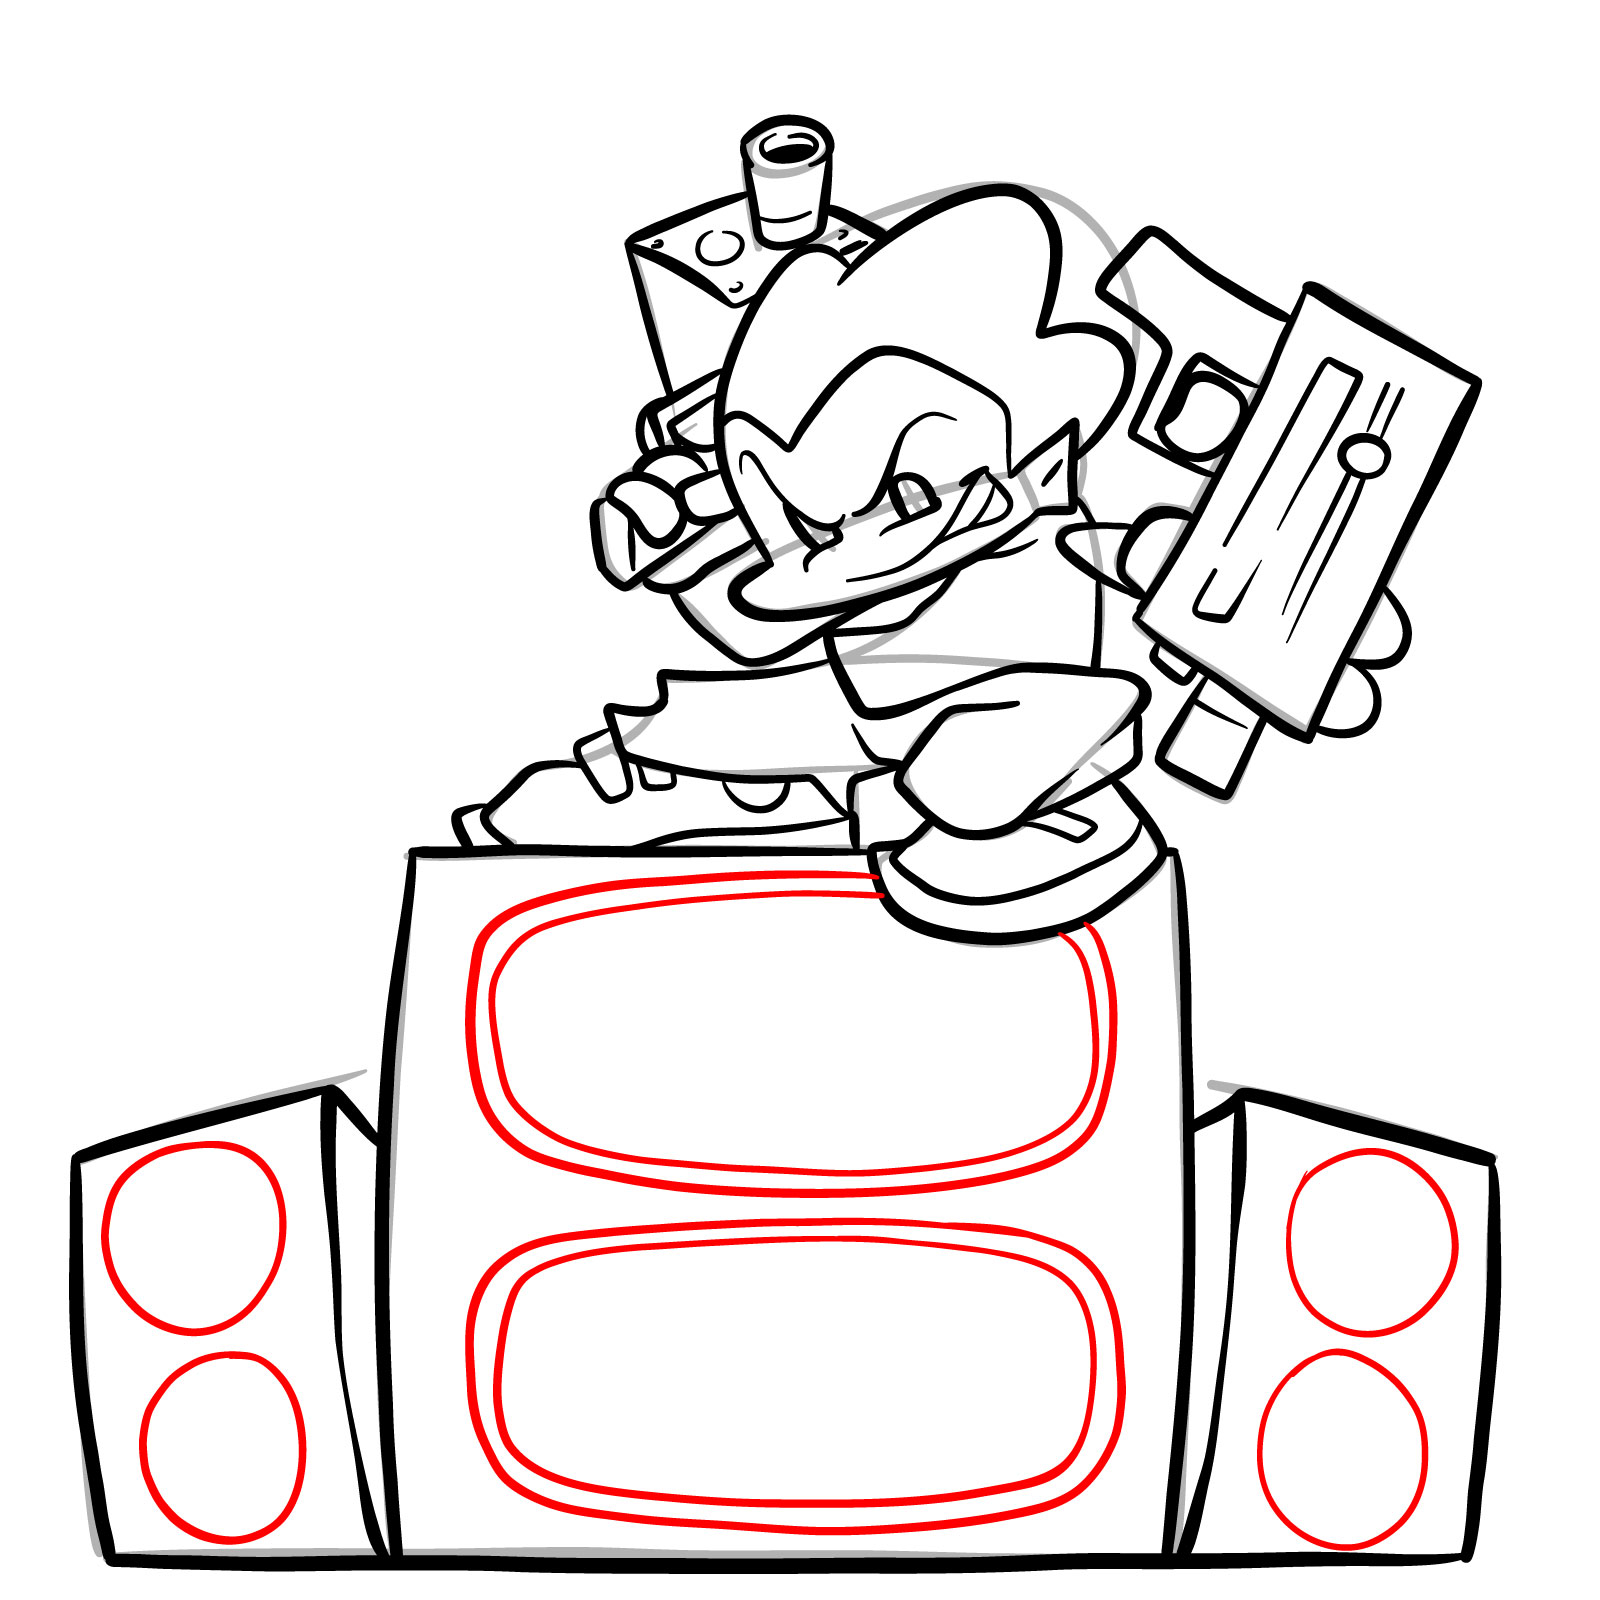 How to draw Pico on the speakers - step 28